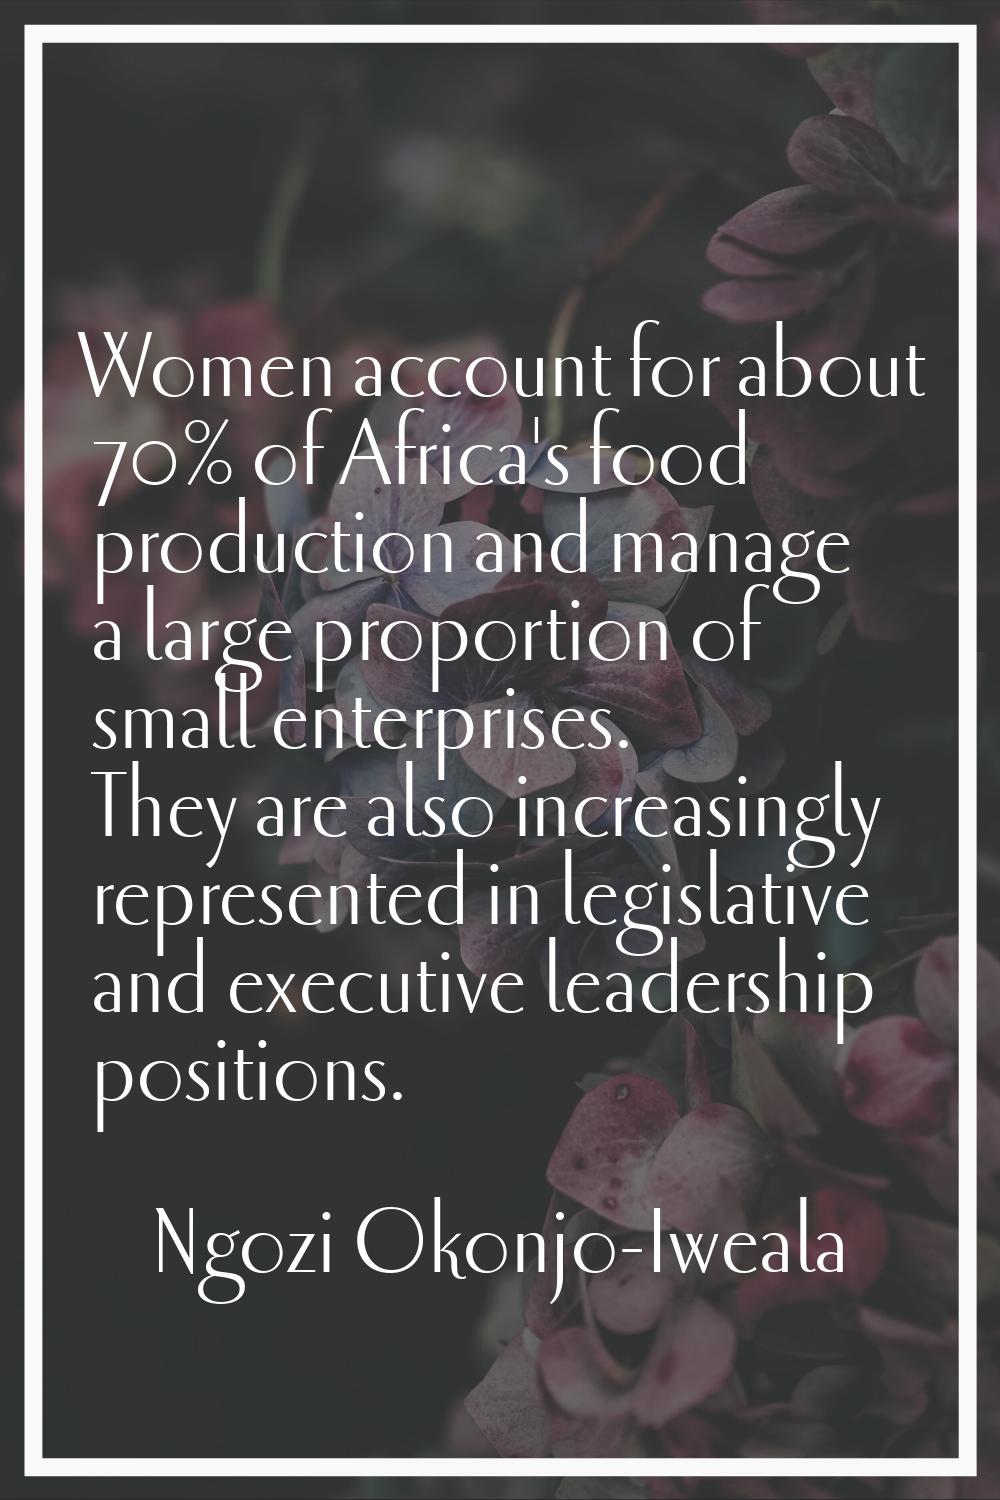 Women account for about 70% of Africa's food production and manage a large proportion of small ente